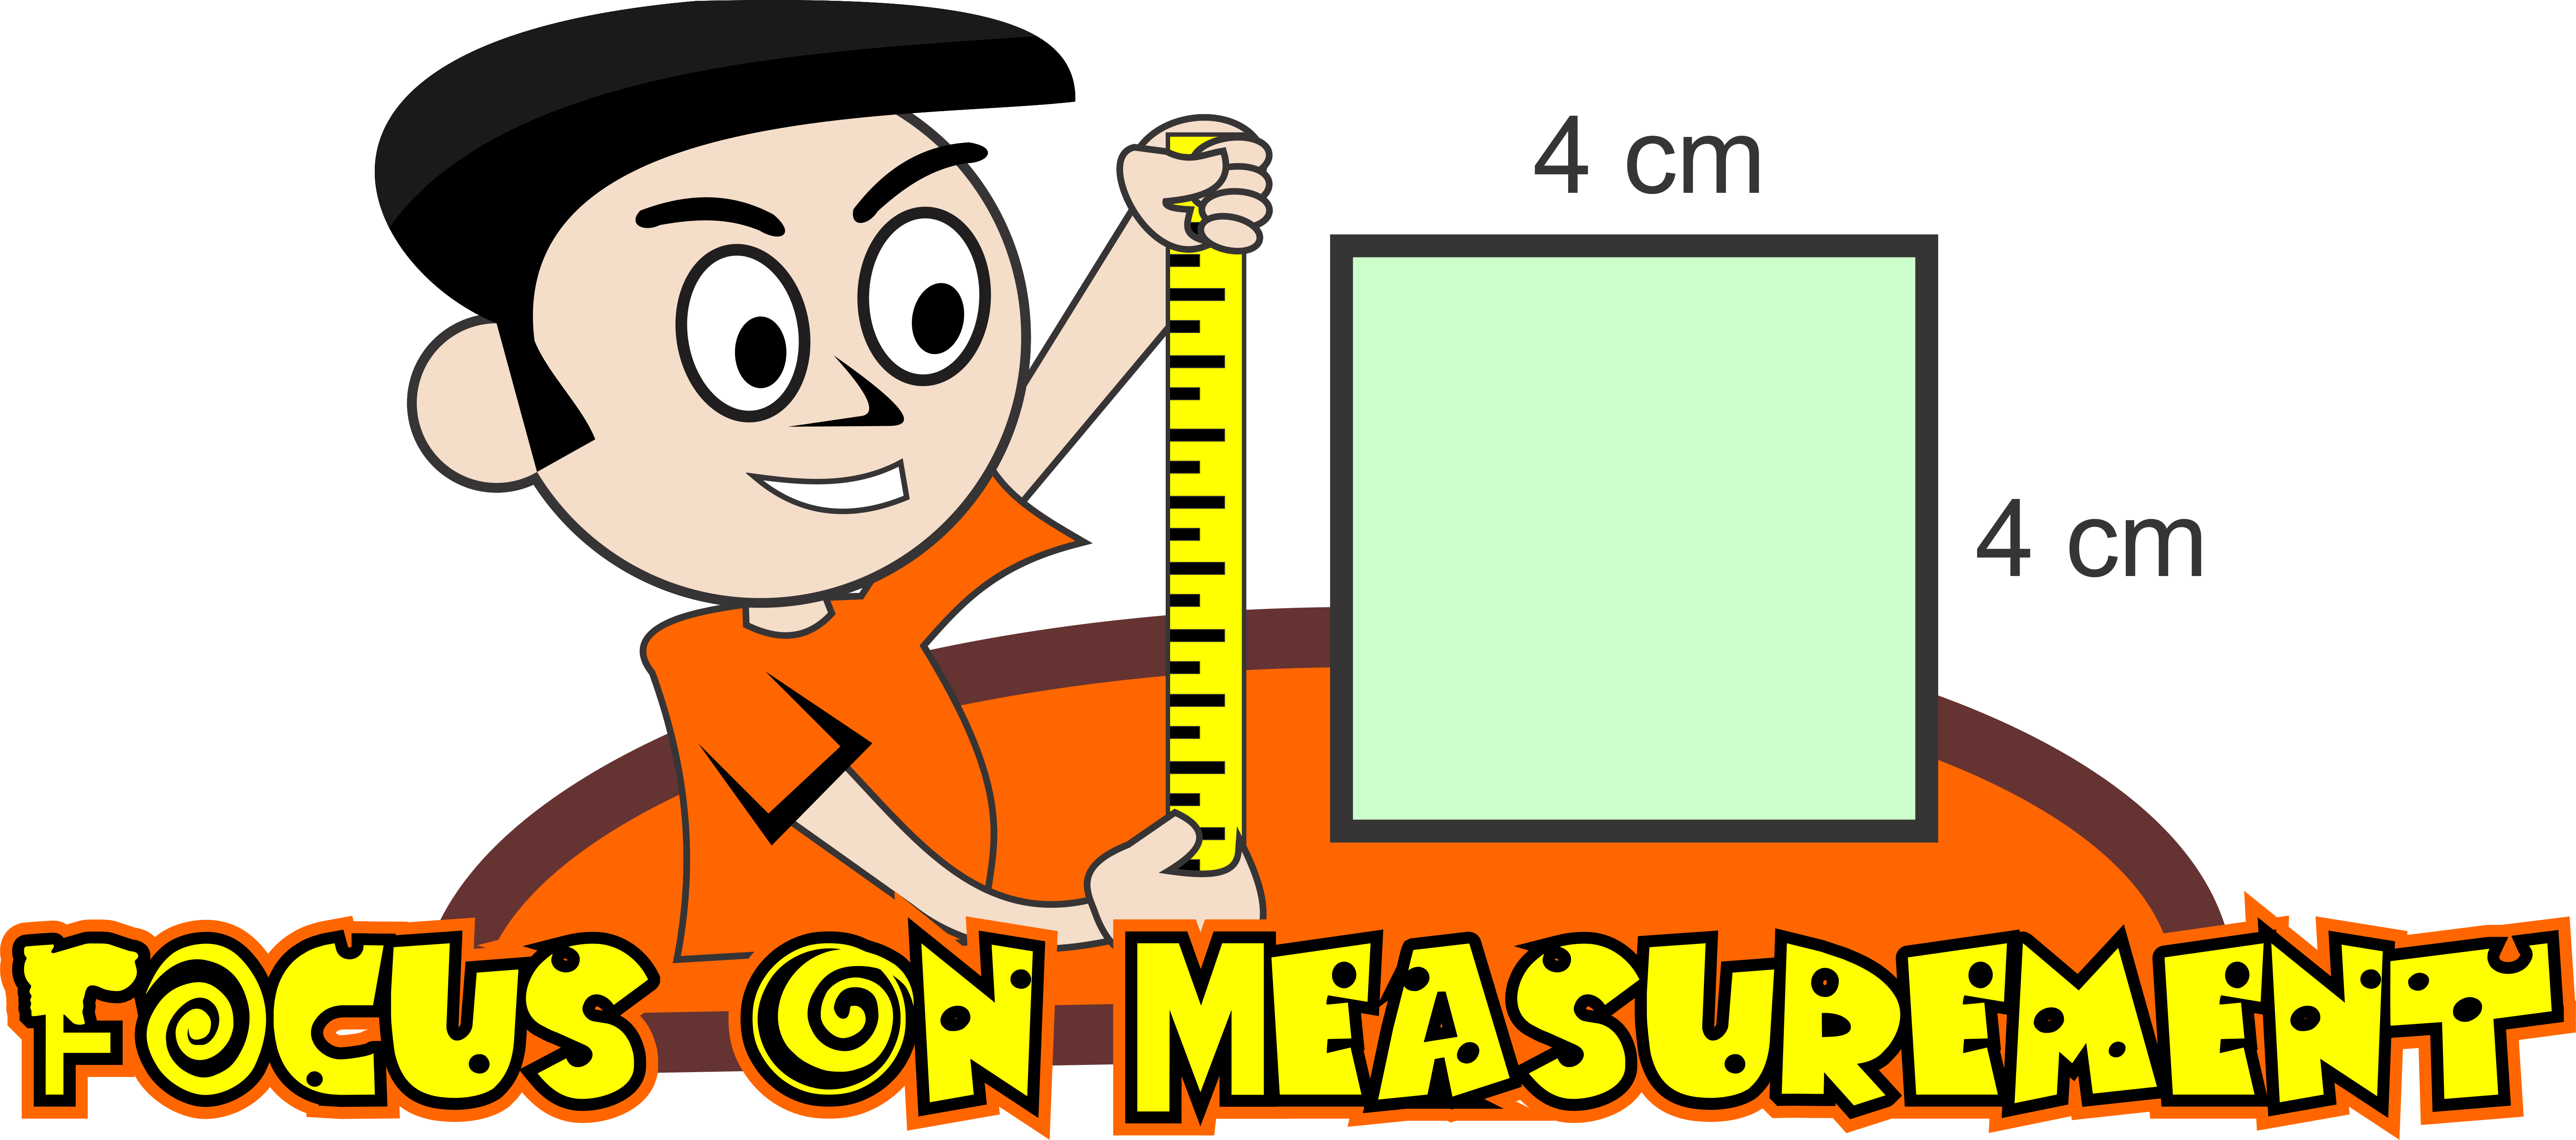 tall clipart measurement